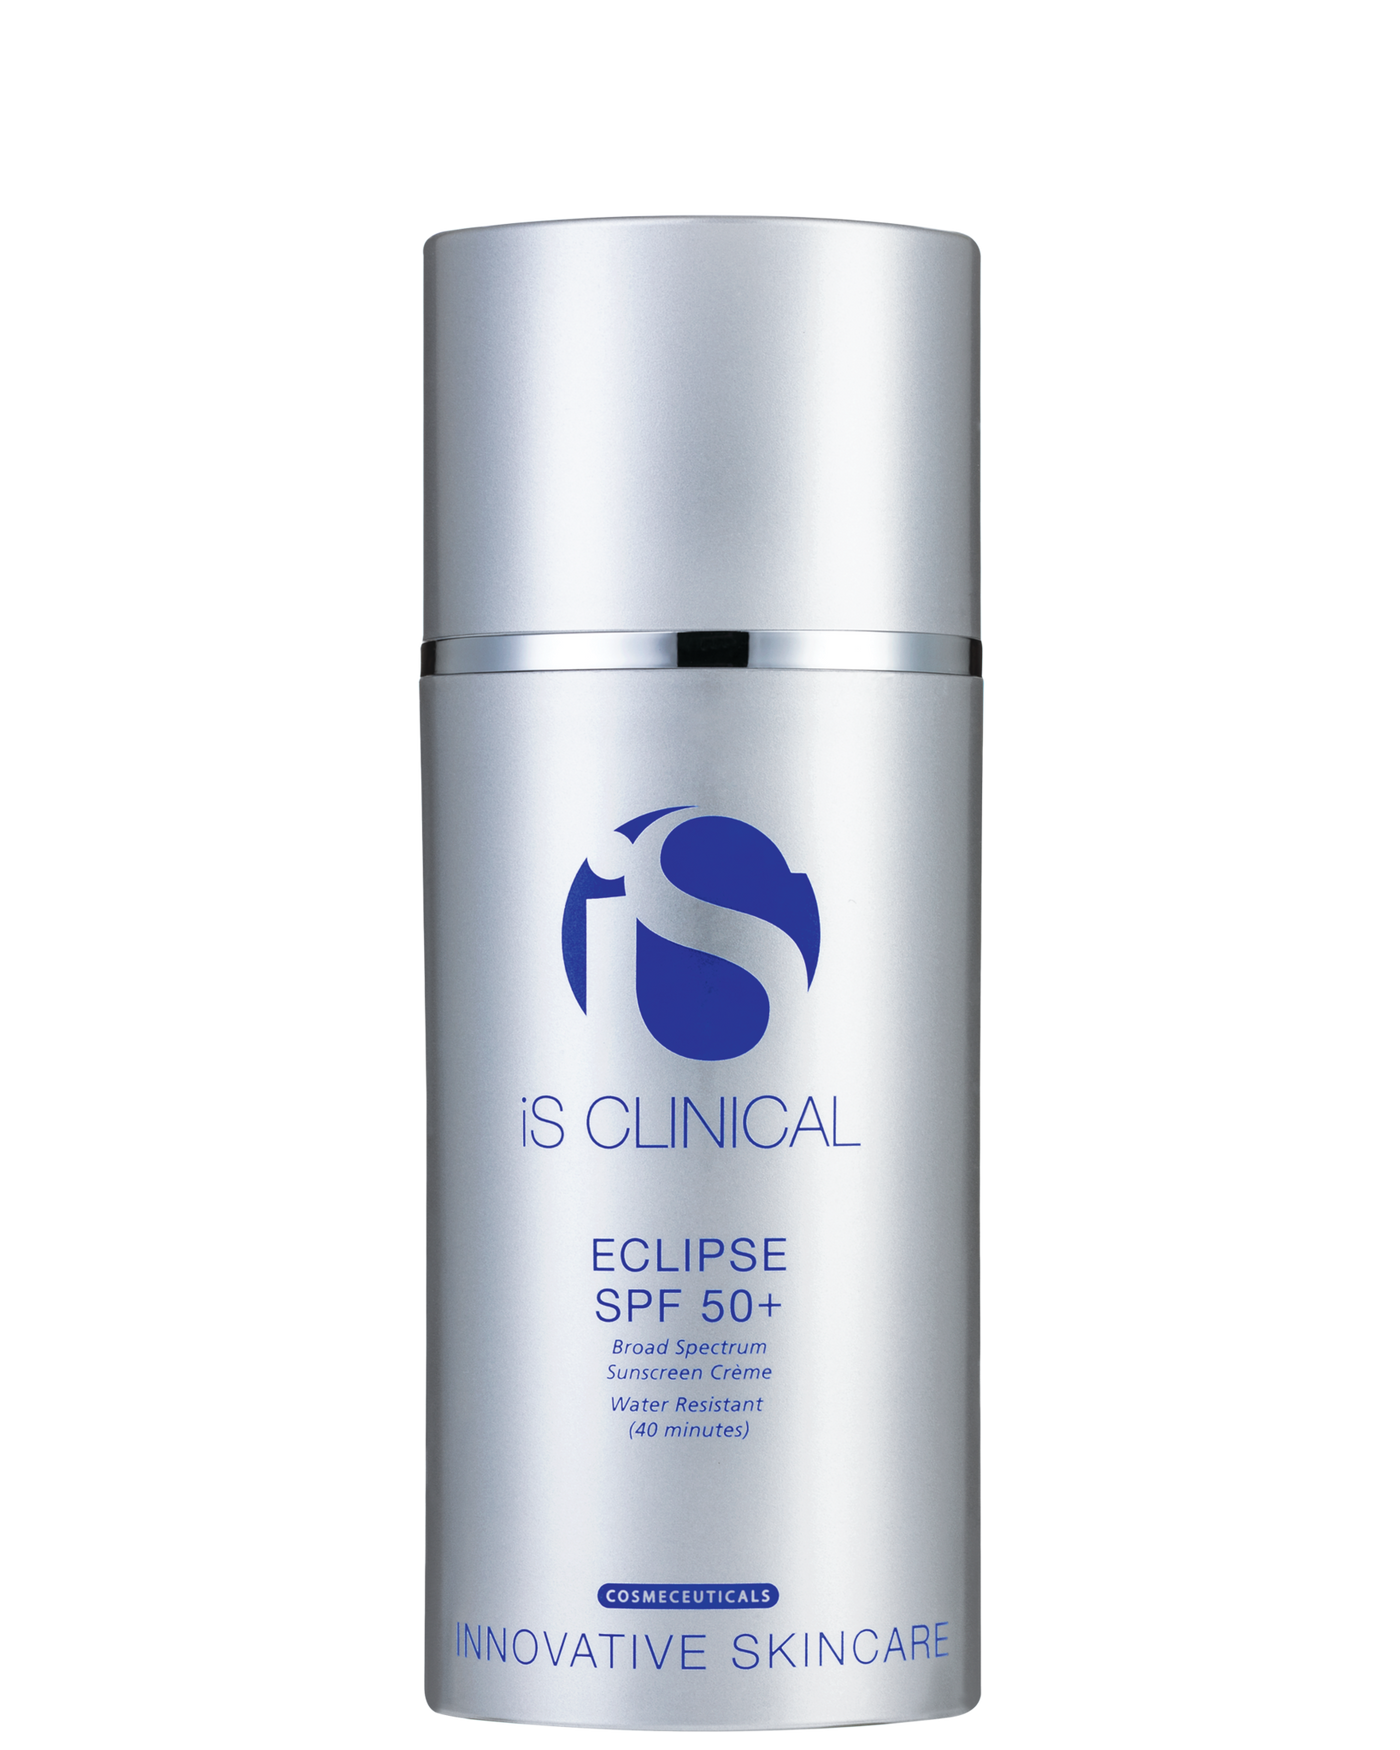 iS Clinical - Eclipse SPF 50+